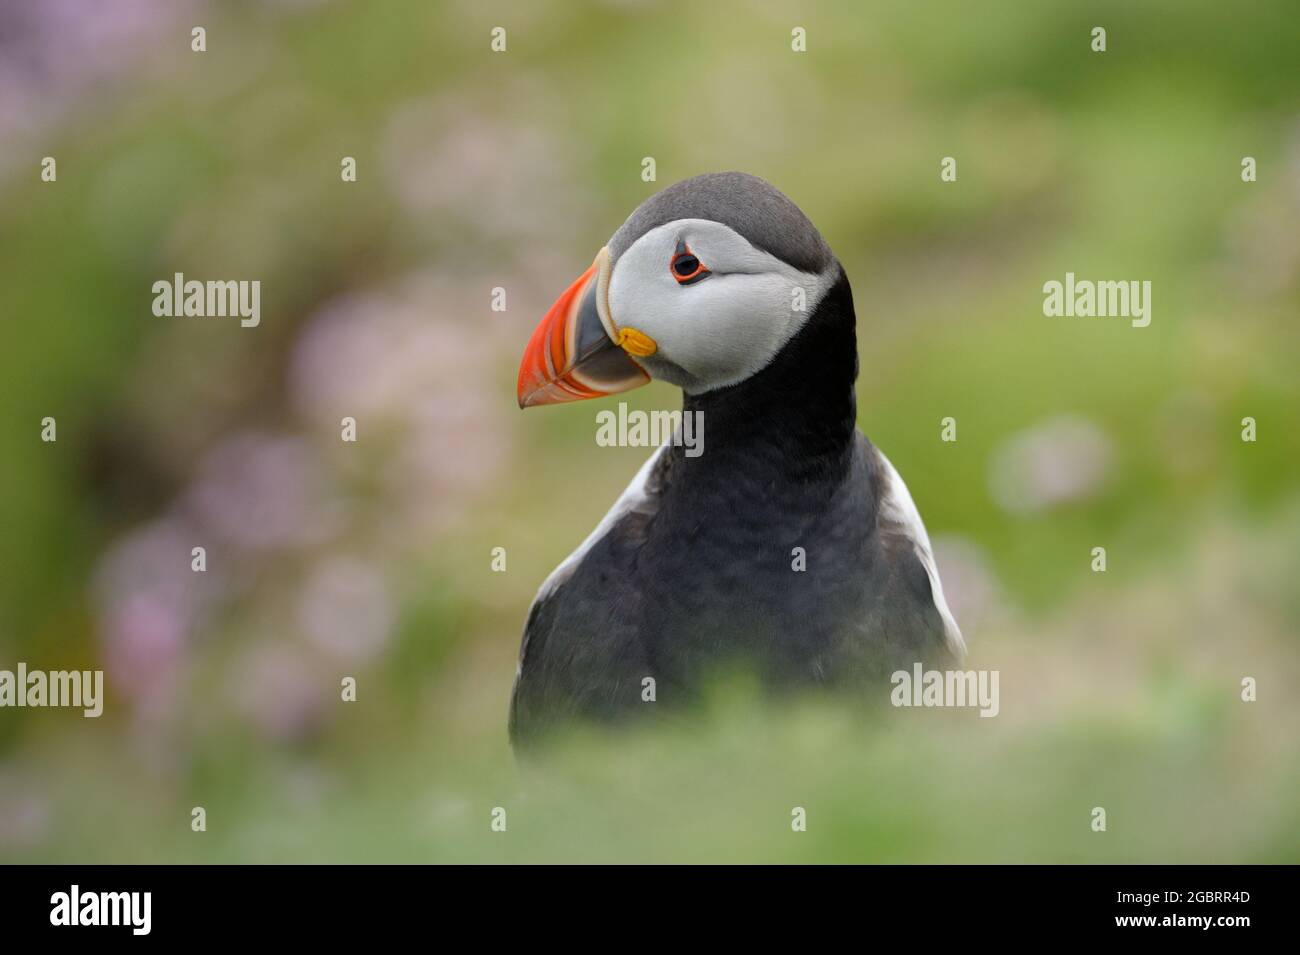 Atlantic puffin (Fratercula arctica) portrait in green grass with shallow depth of field, Shetland islands, UK. Stock Photo